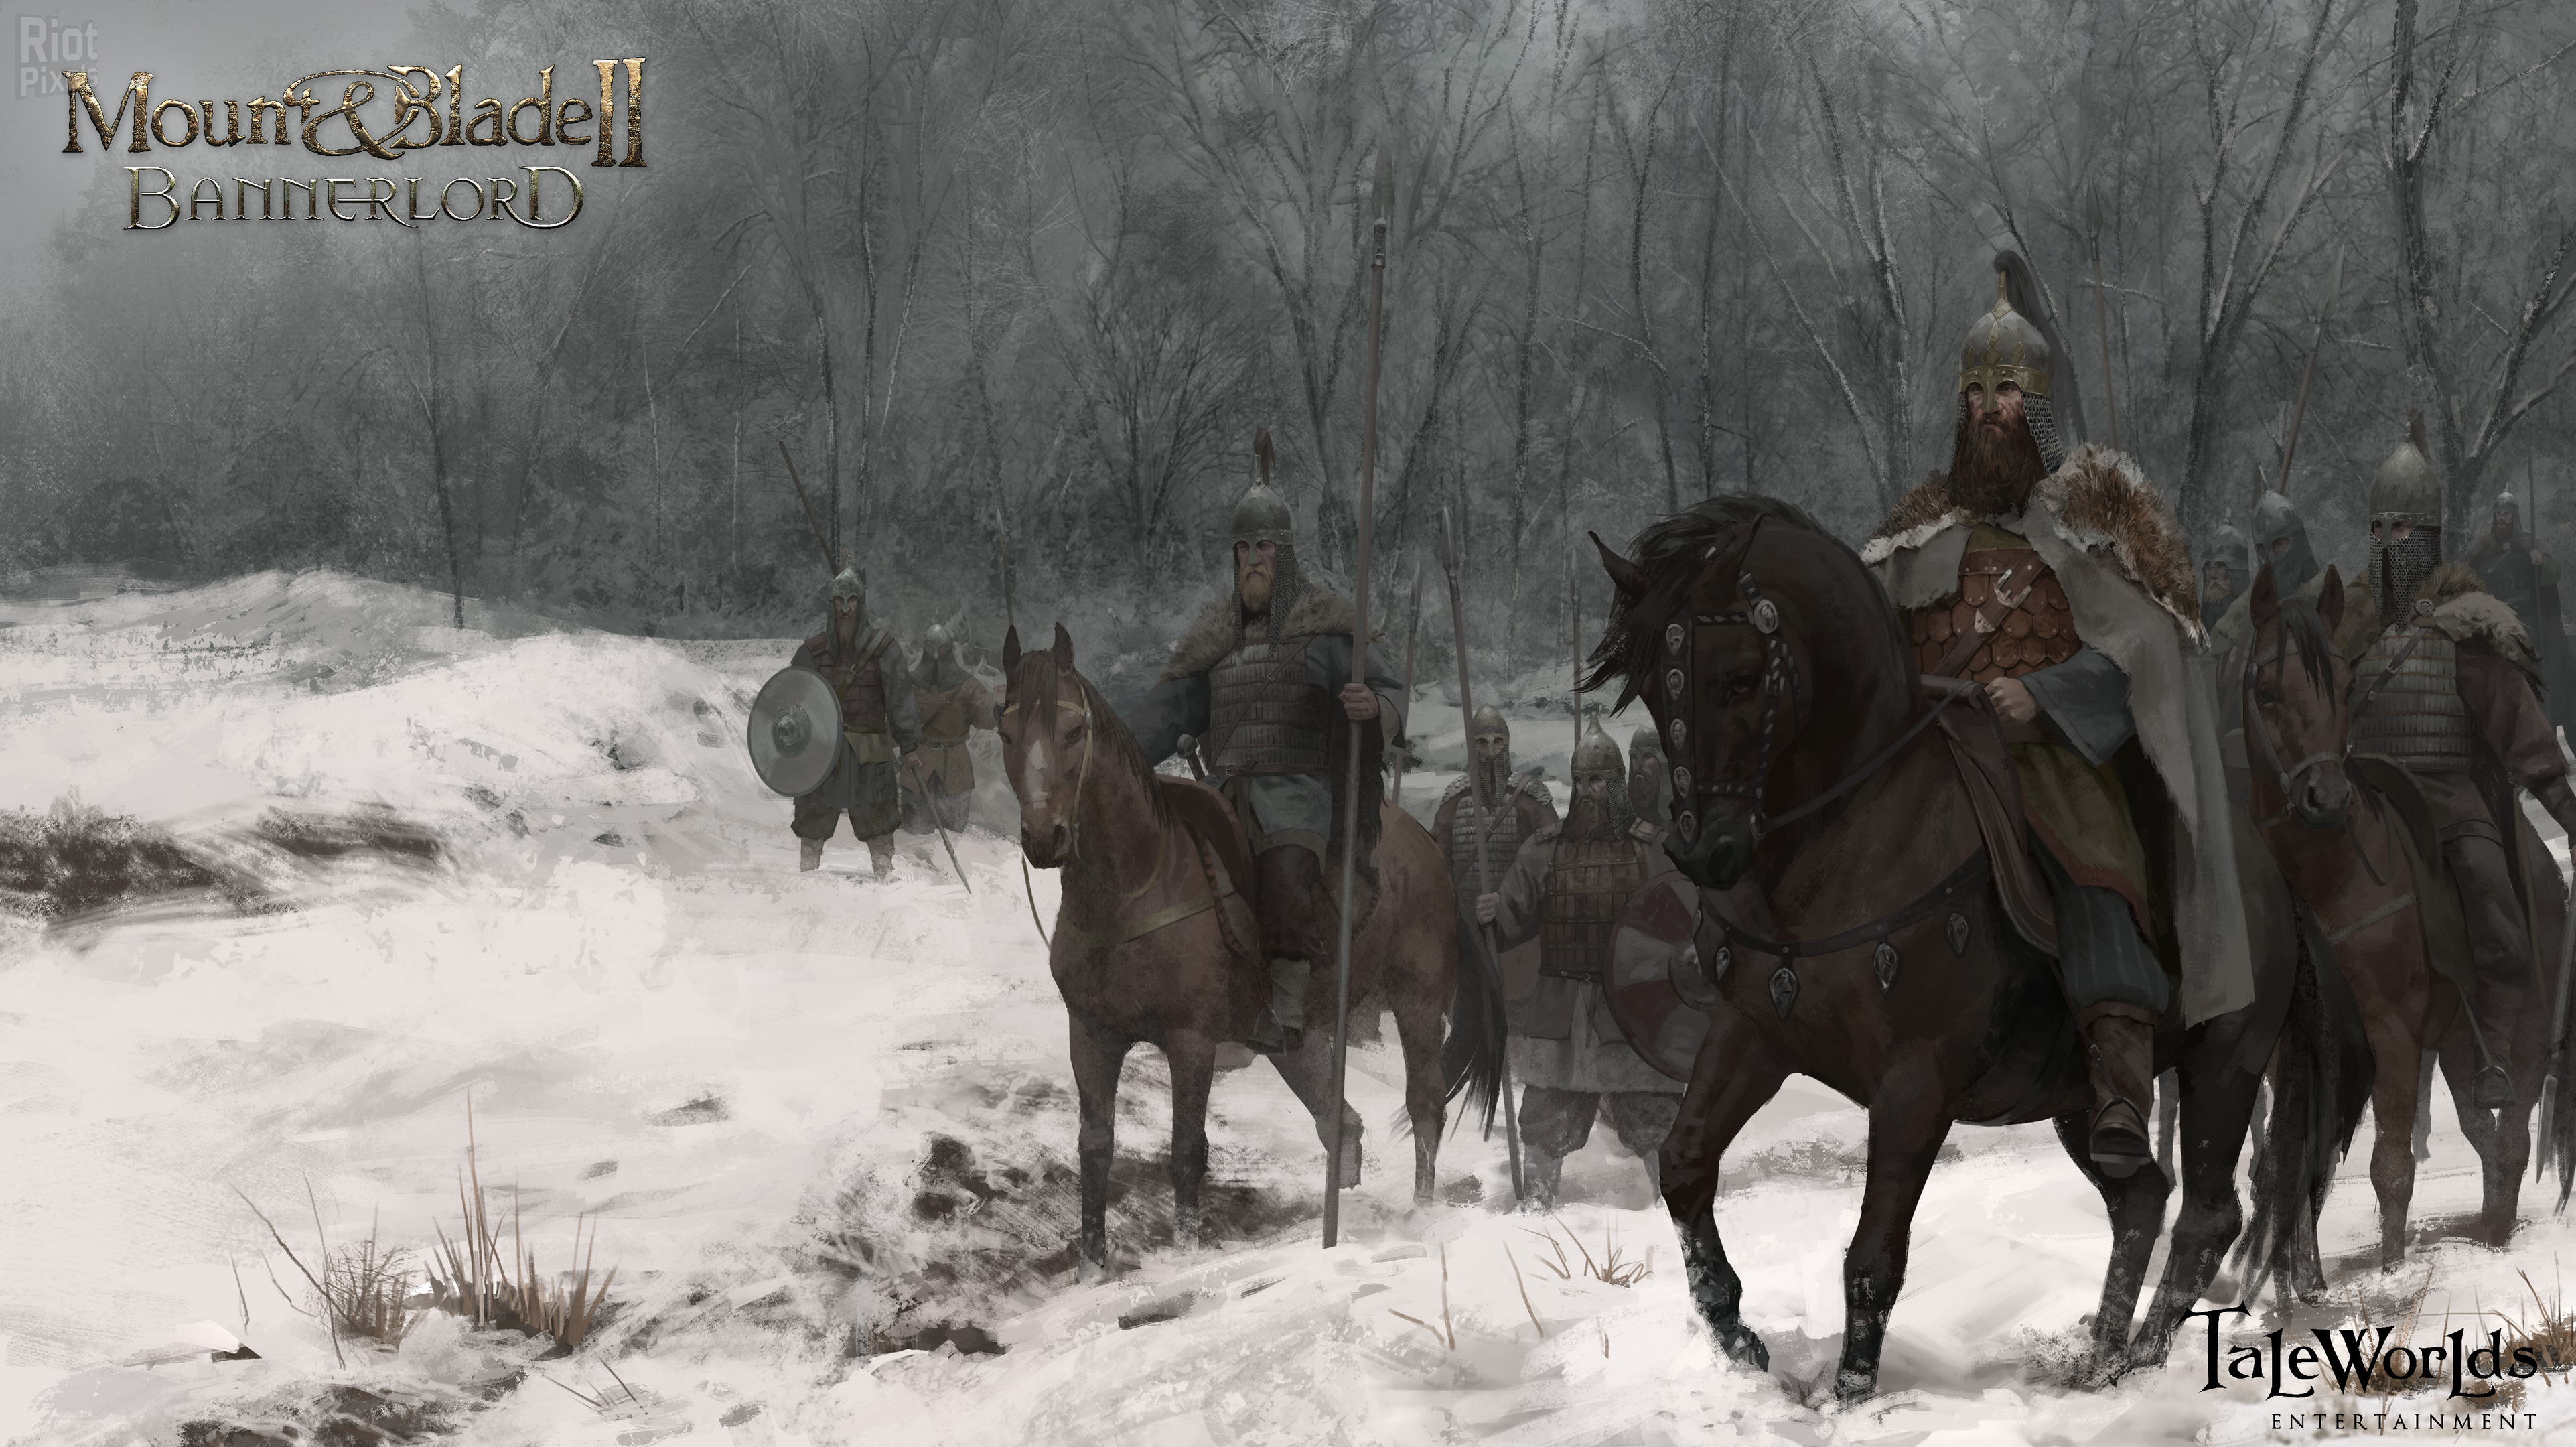 artwork.mount-and-blade-2-bannerlord.3846x2160.2015-08-06.39.jpg